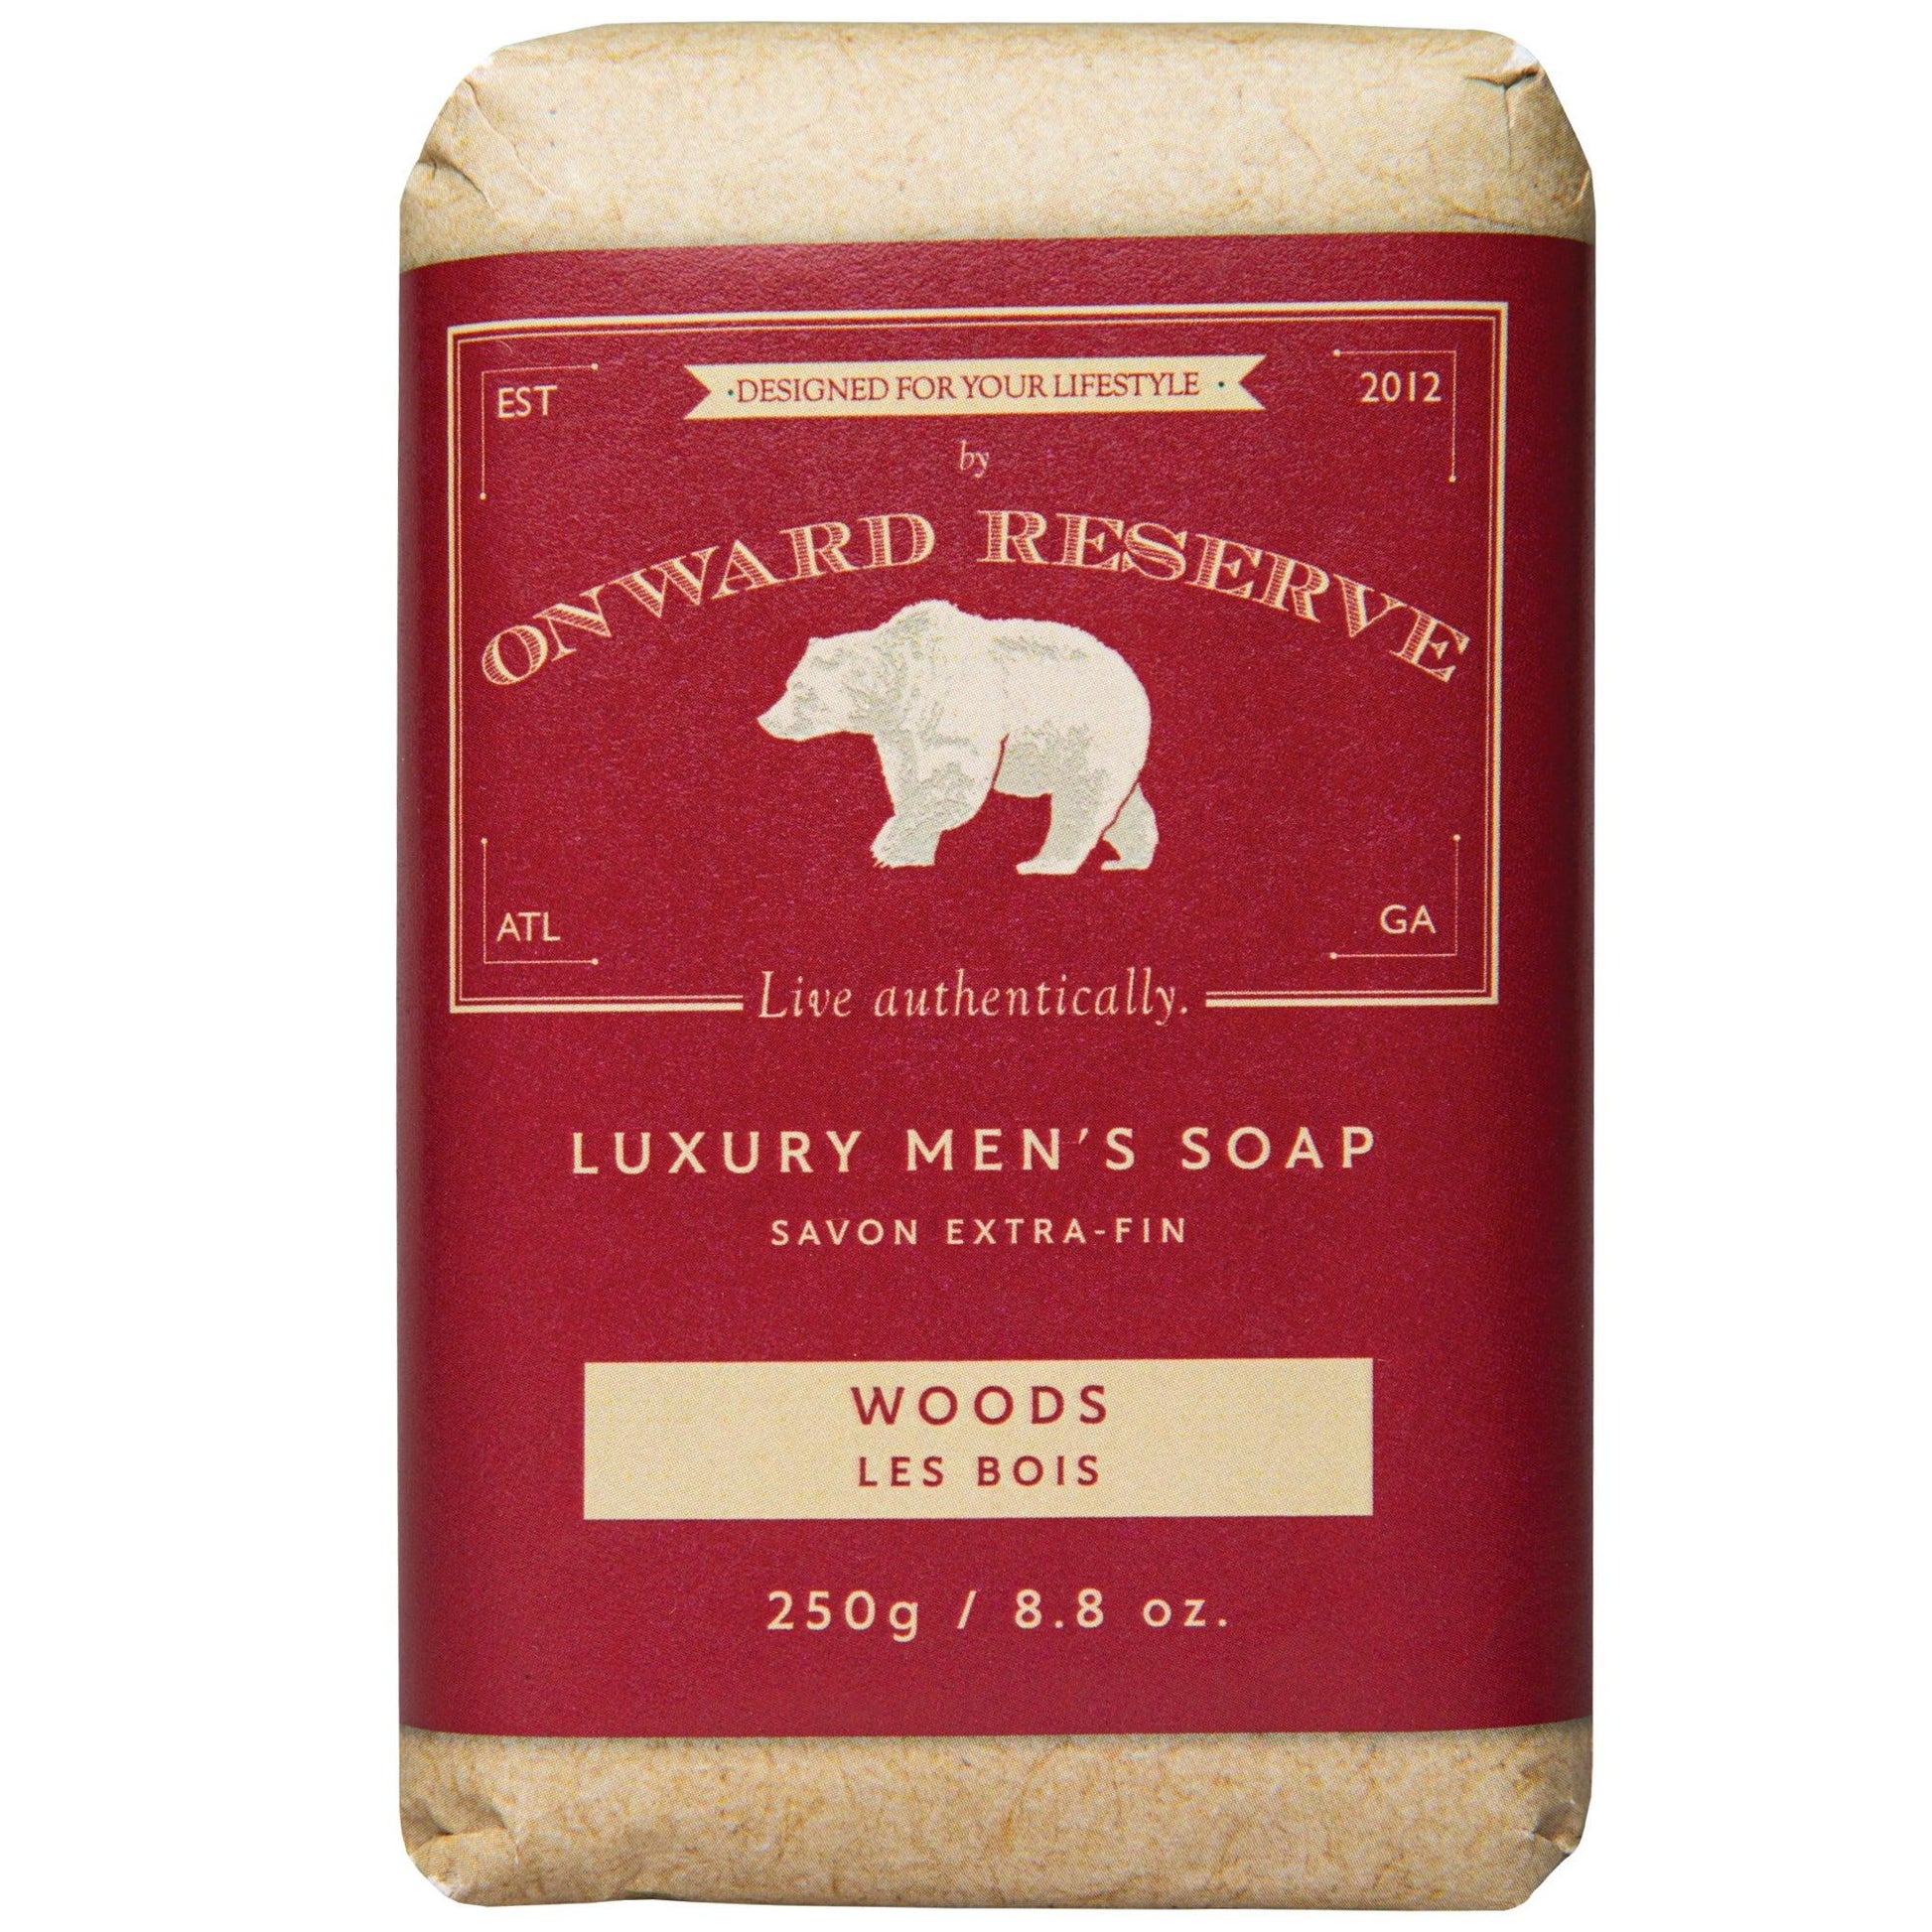 A Walk in the Woods Soap for Men- Susan's Soaps & More